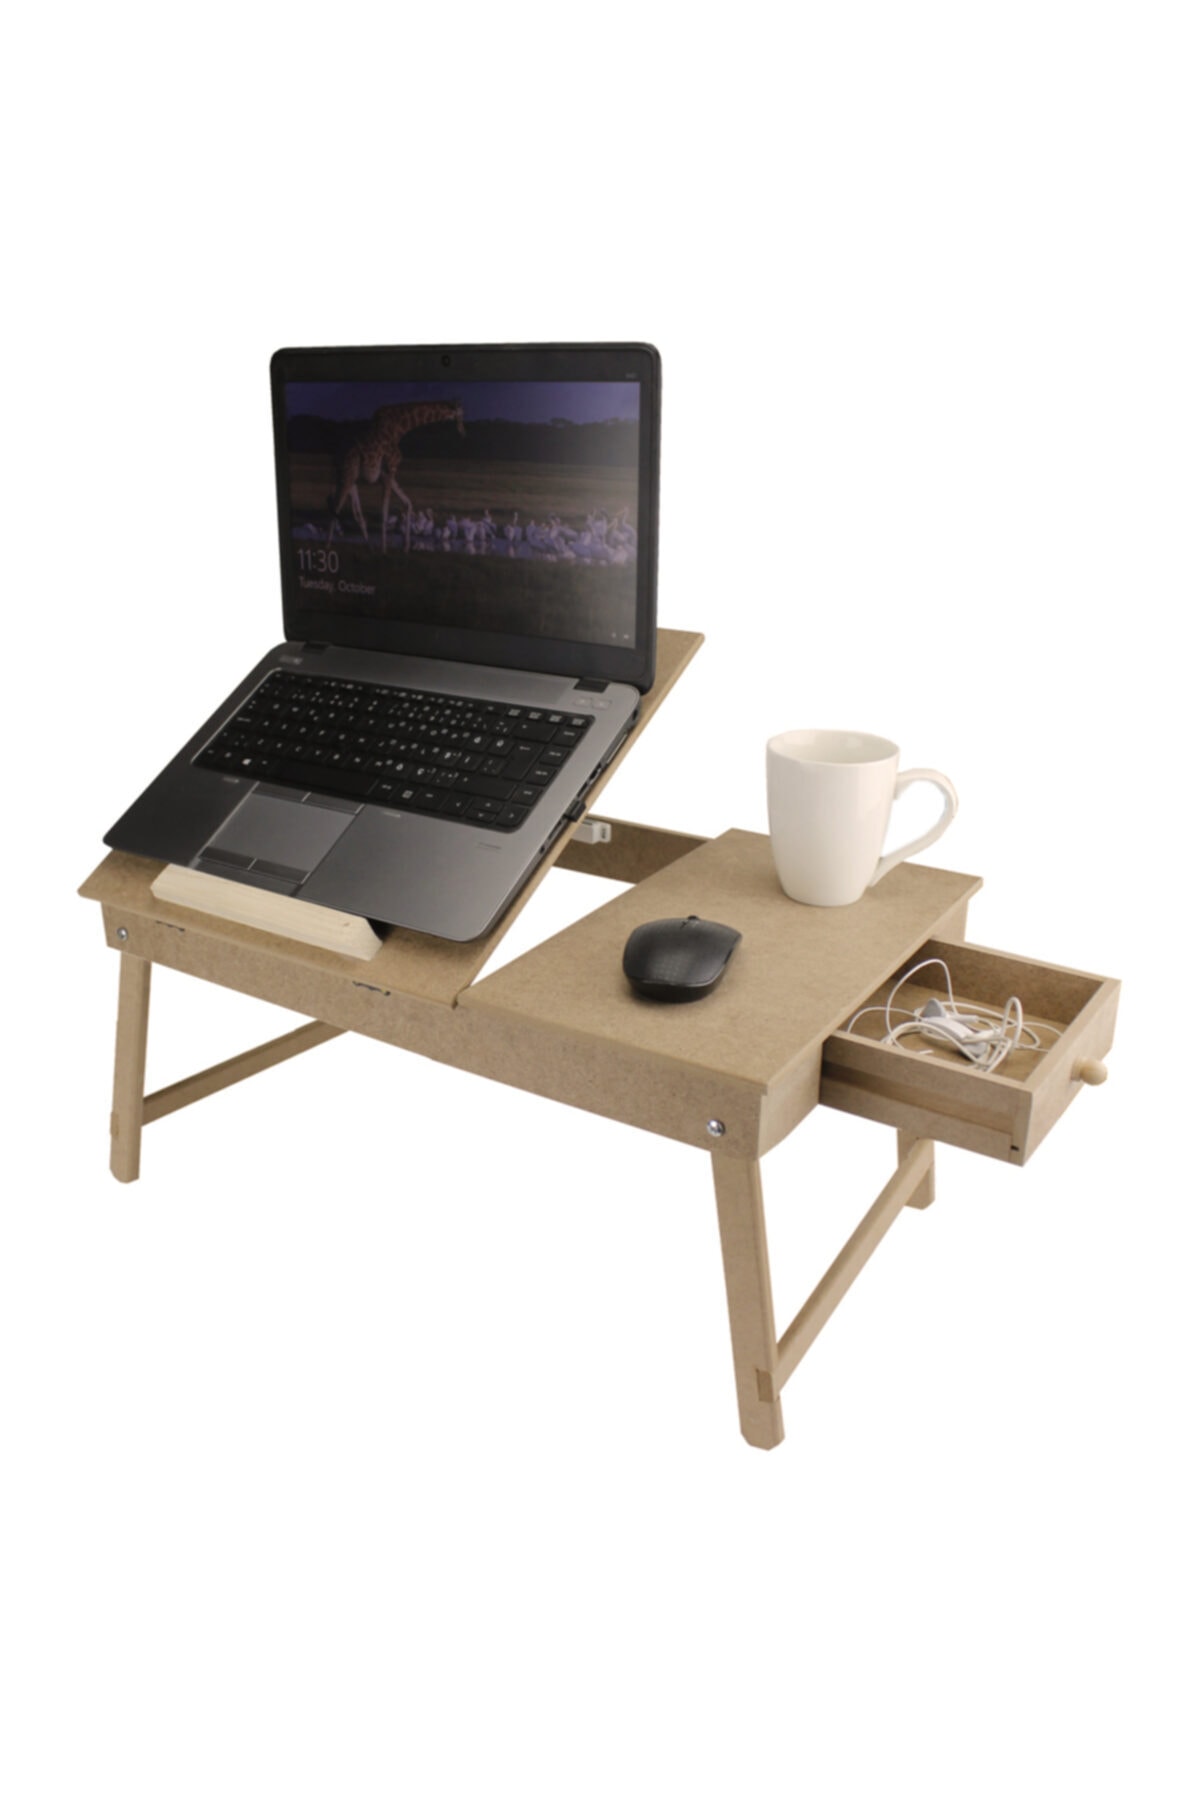 Opvouwbare Nuttig Portable Laptop Stand Bed Sofa Couch Ontbijt Stand Mini Tafel Multifunctionele